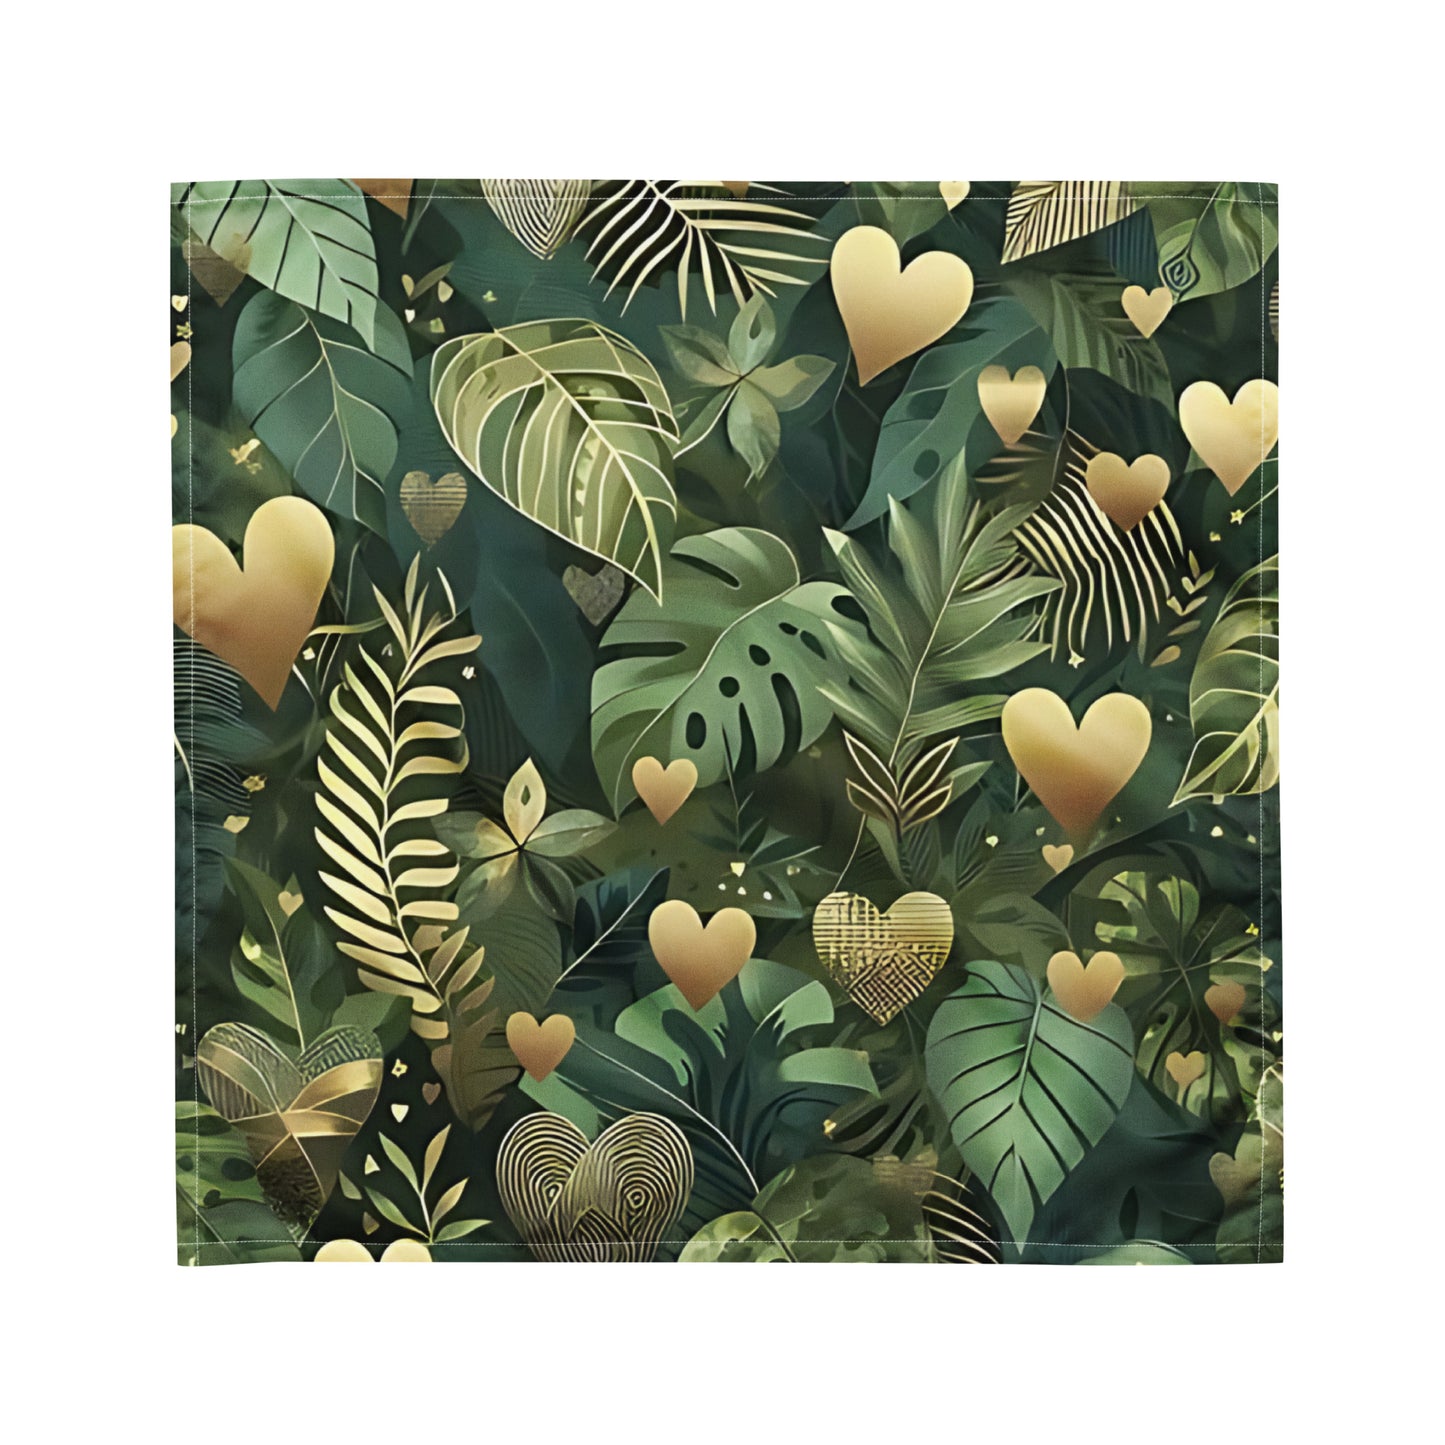 HEART IN THE FOREST